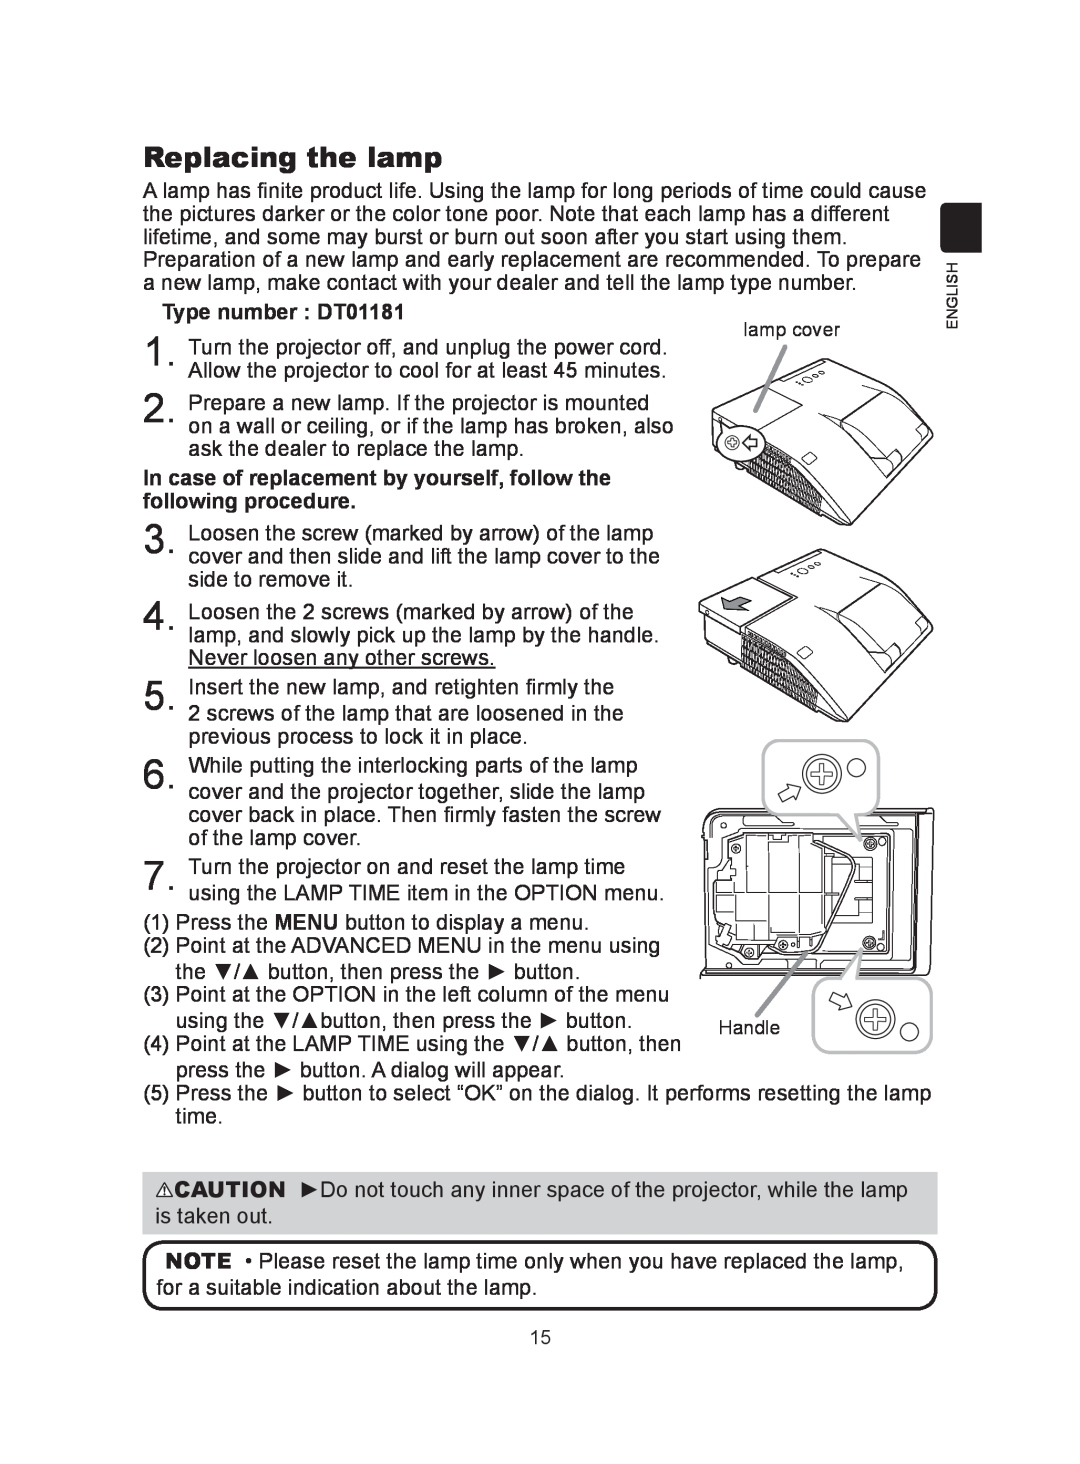 Hitachi CP-A300N user manual Replacing the lamp, Type number DT01181 